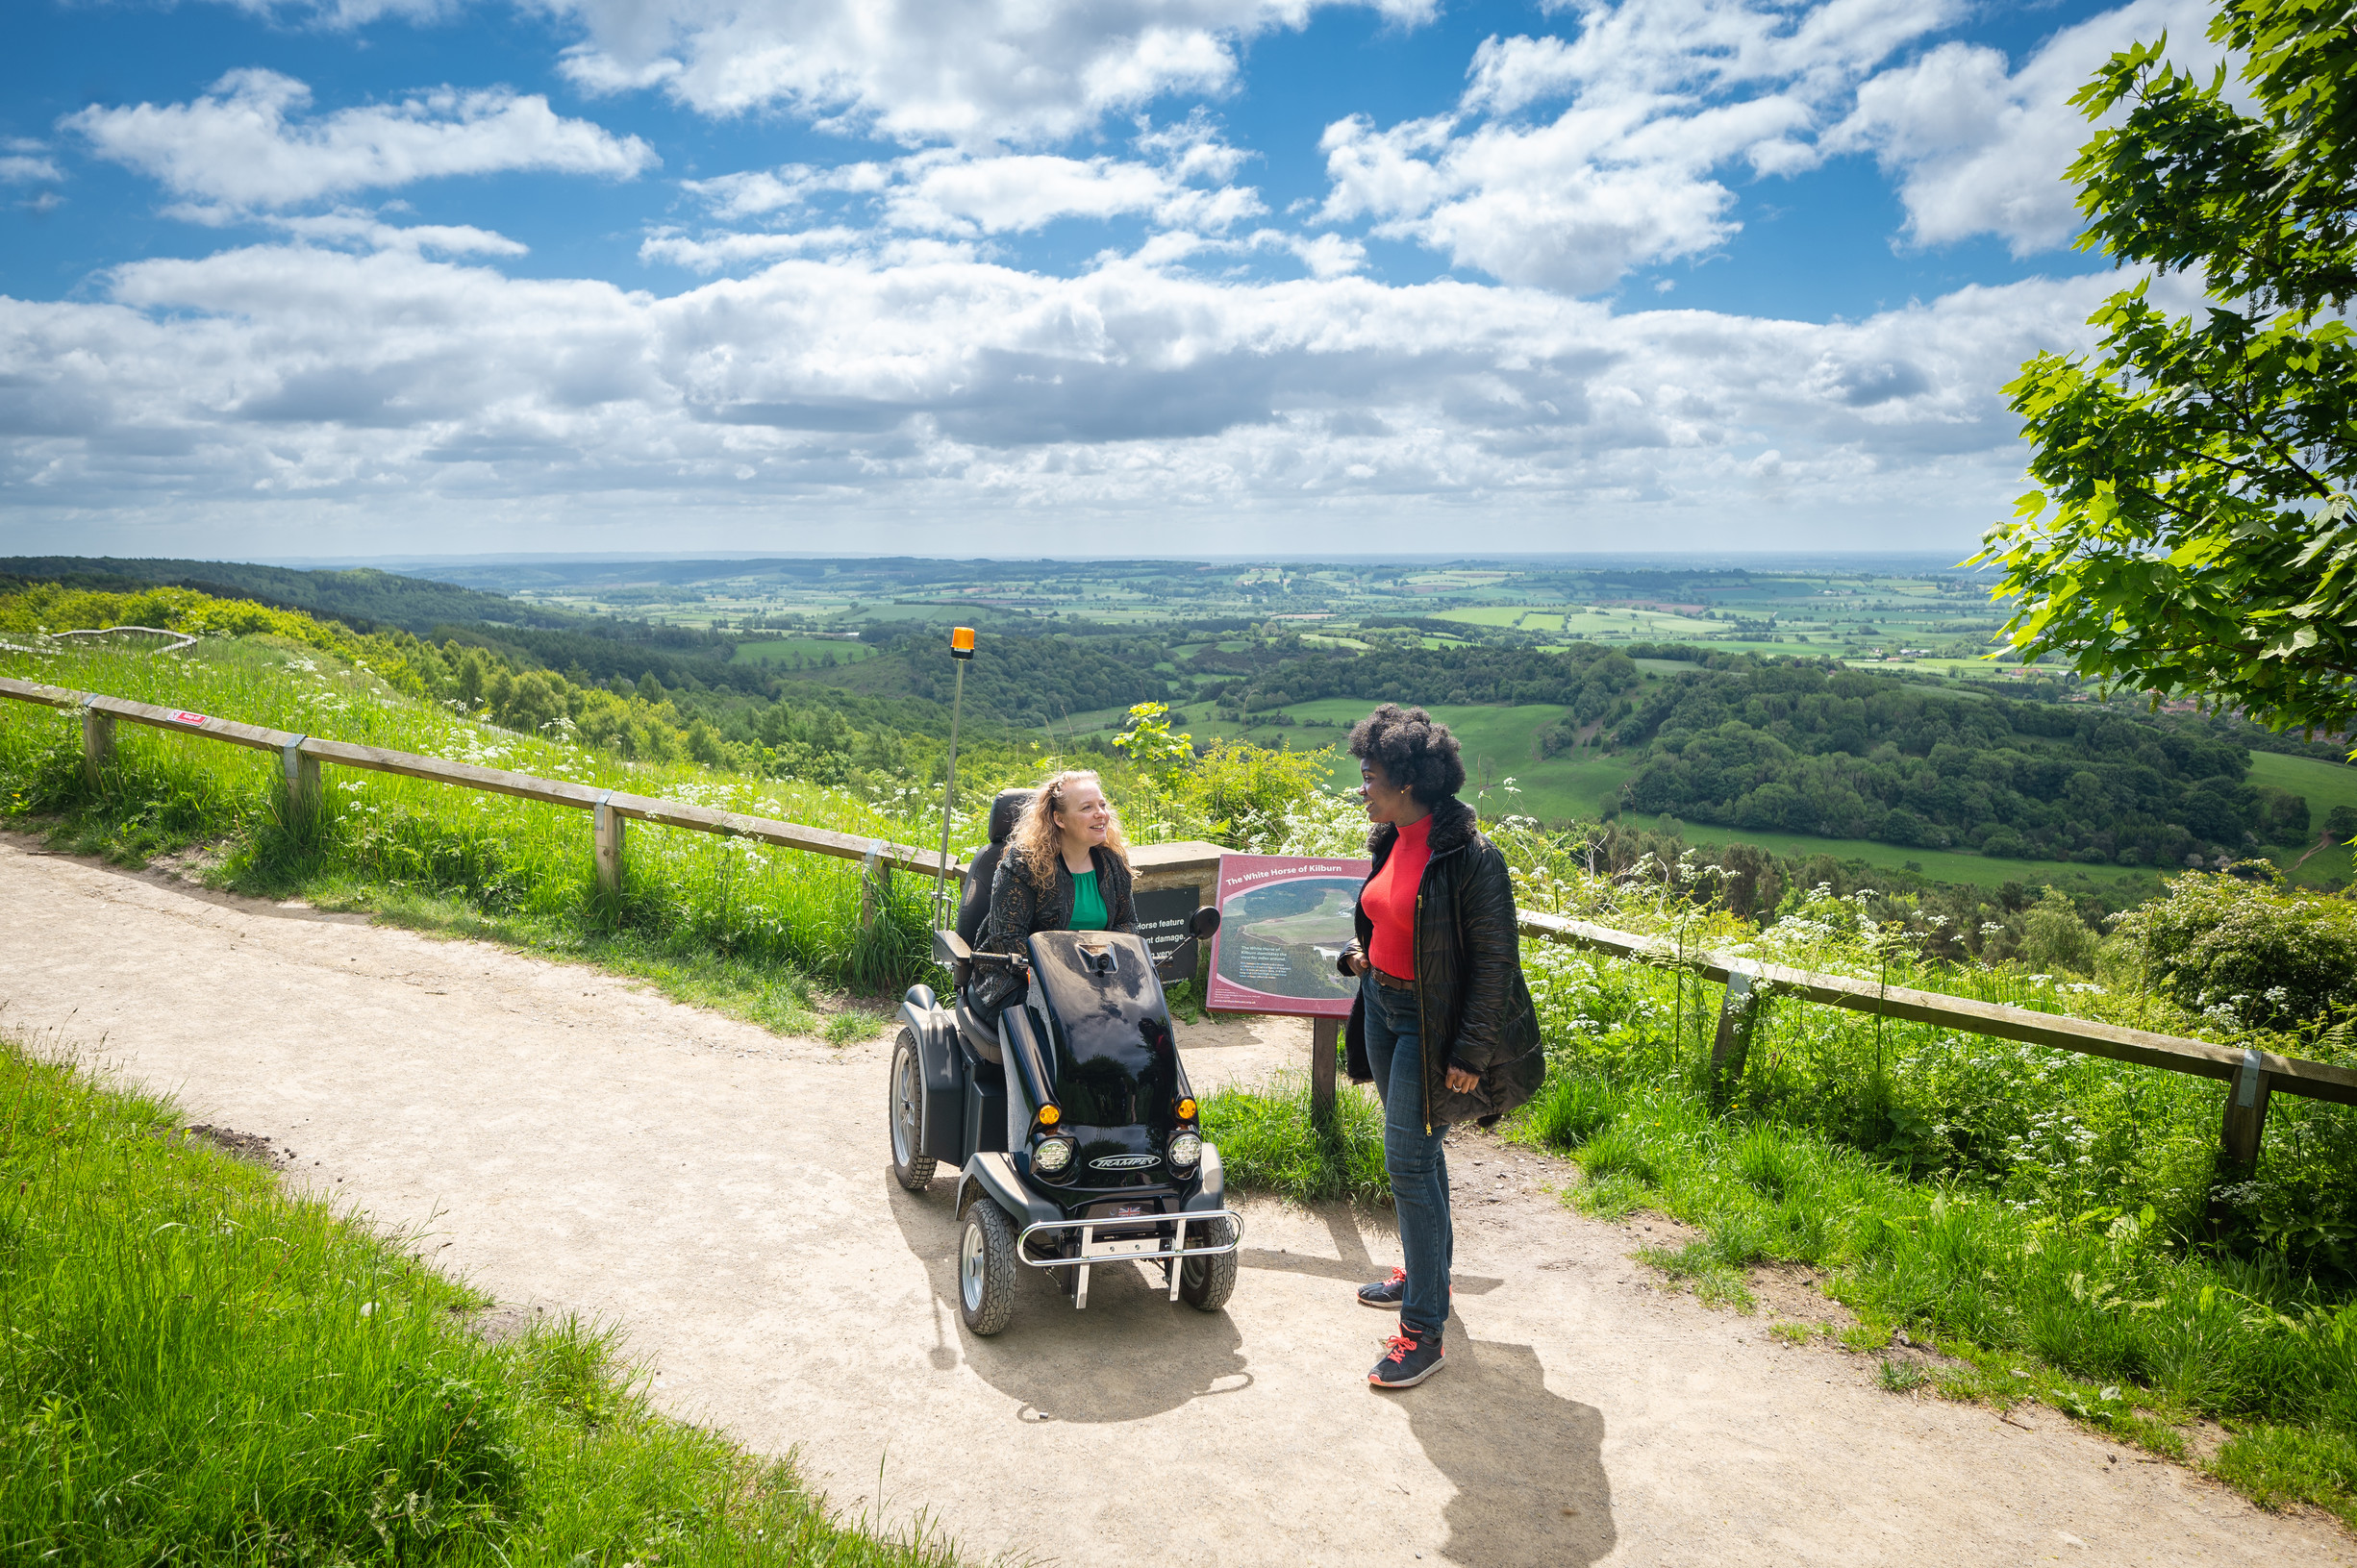 Two women on the White Horse Trail, one using a tramper